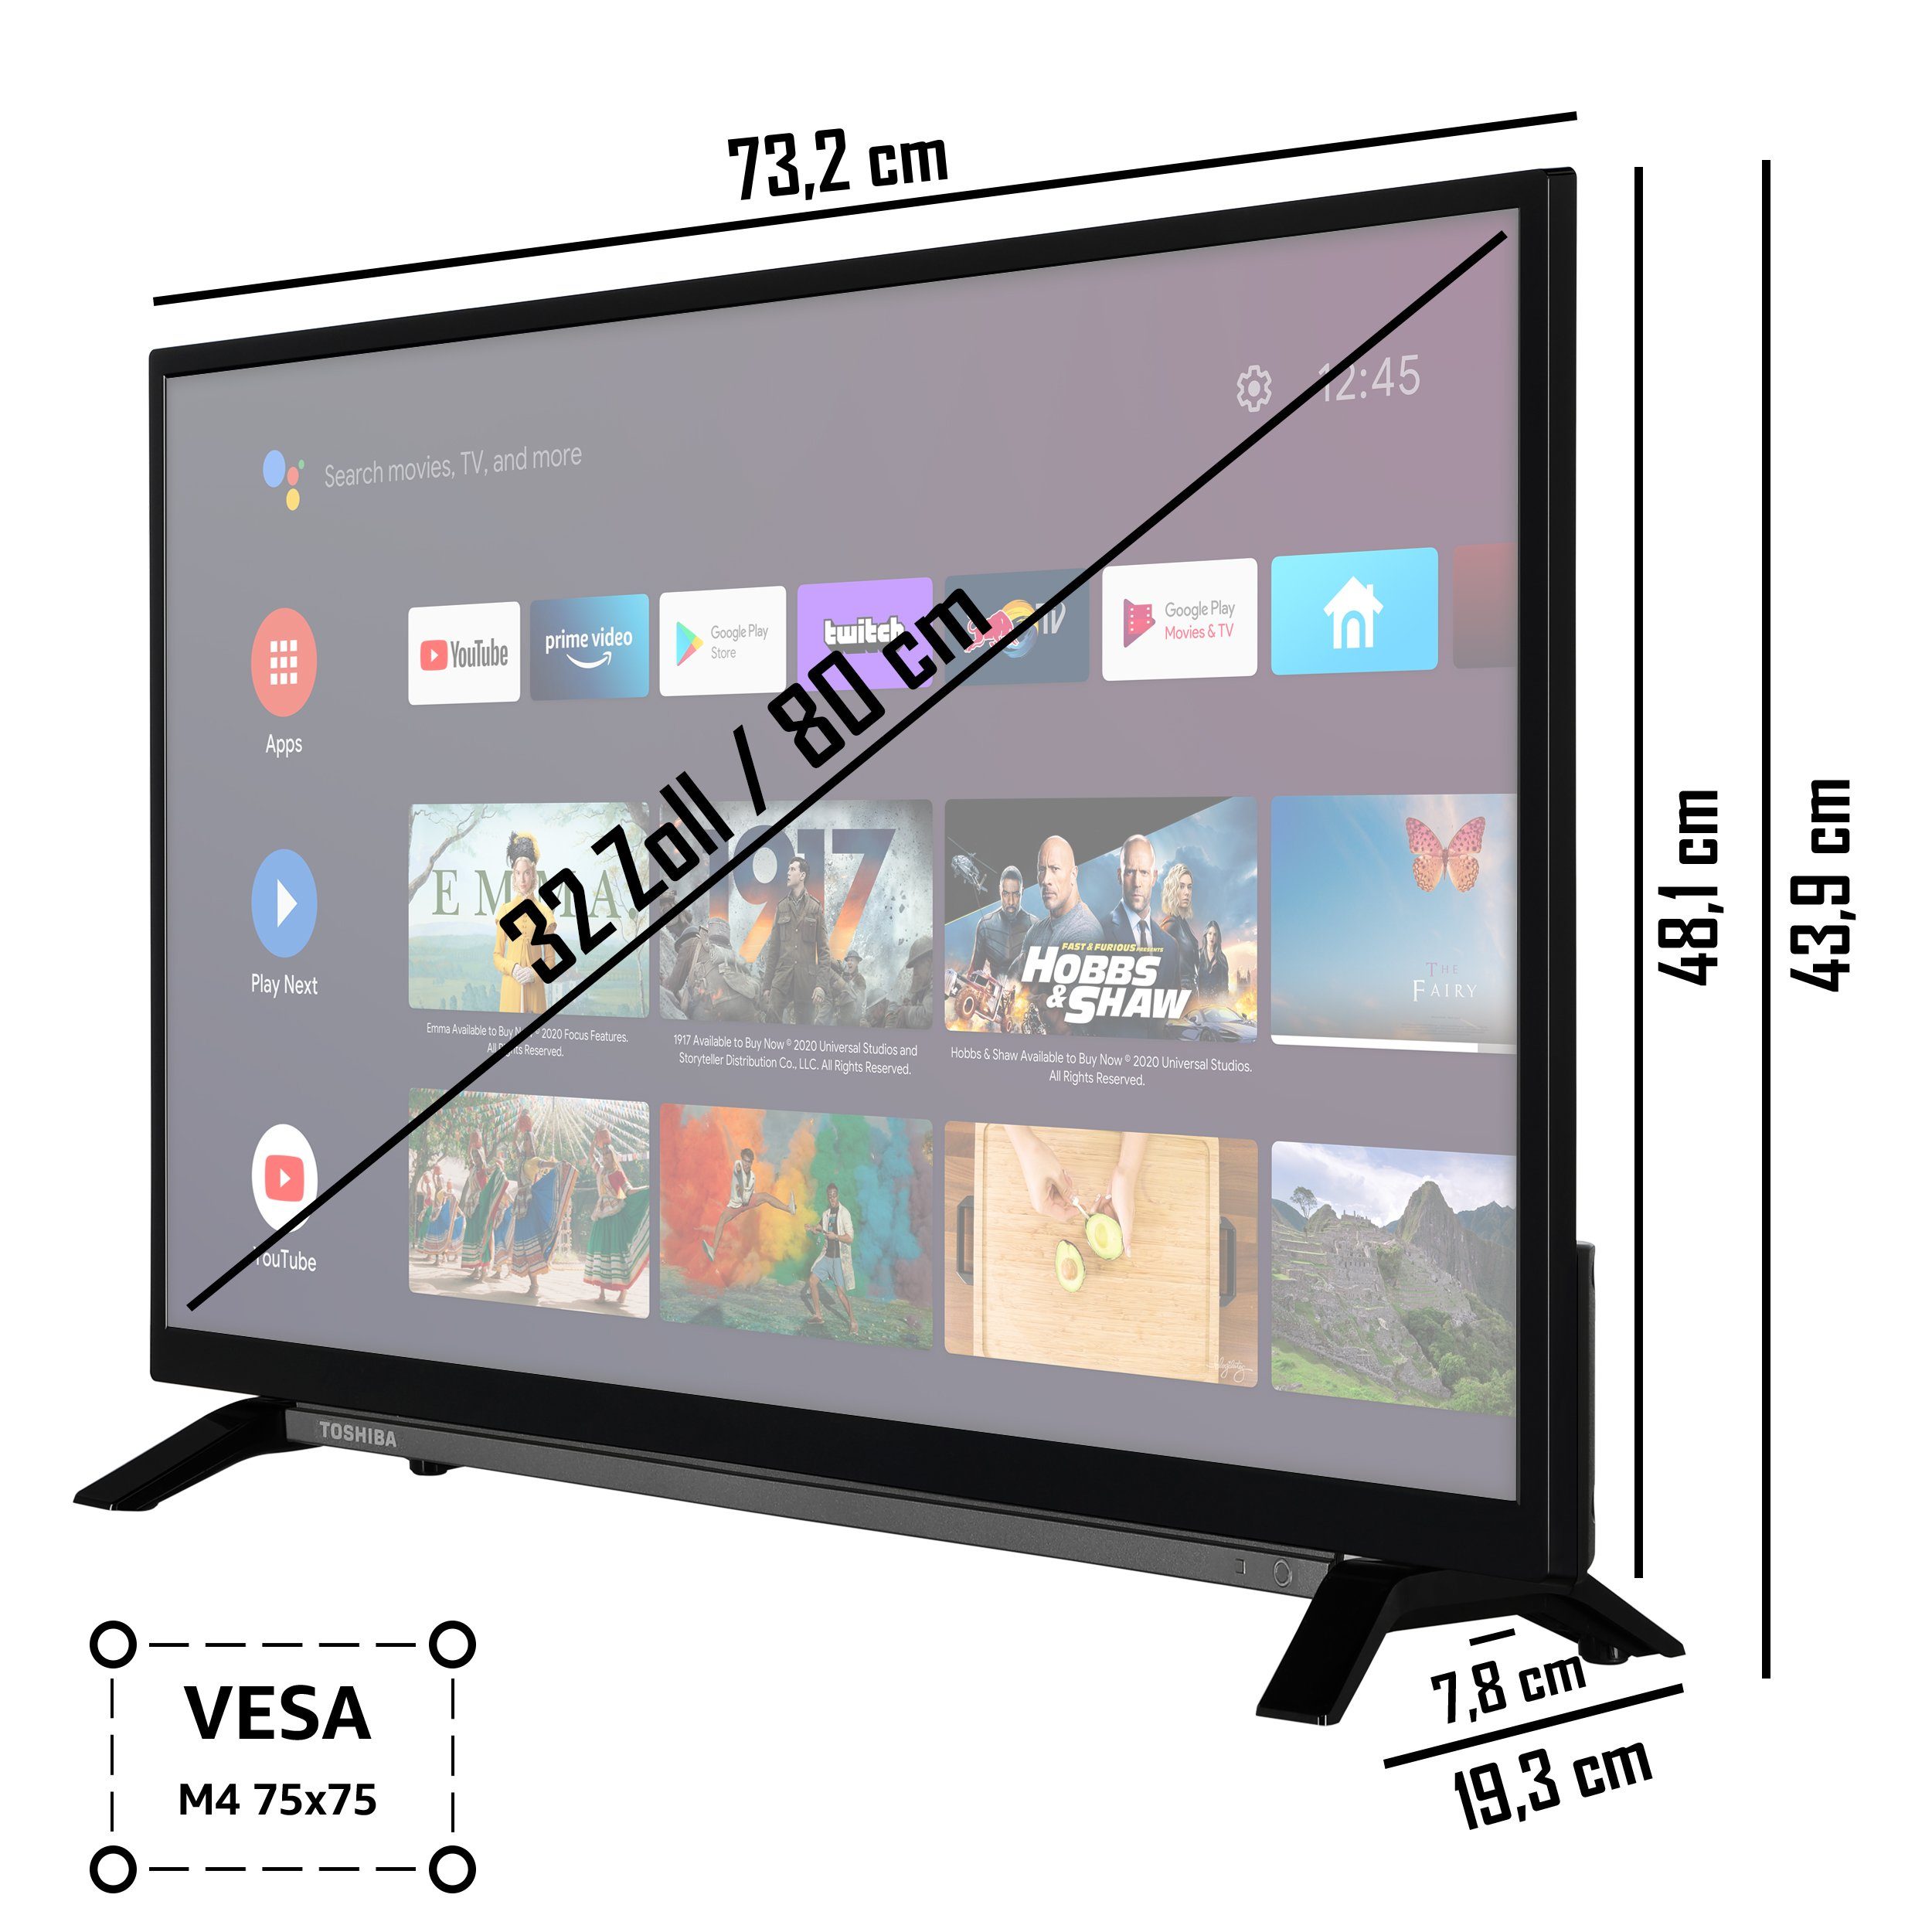 Play Android 32LA2B63DAZ Triple-Tuner, Google LCD-LED TV, Store, Toshiba Zoll, Bluetooth) (80 Fernseher Assistant, HD, Full cm/32